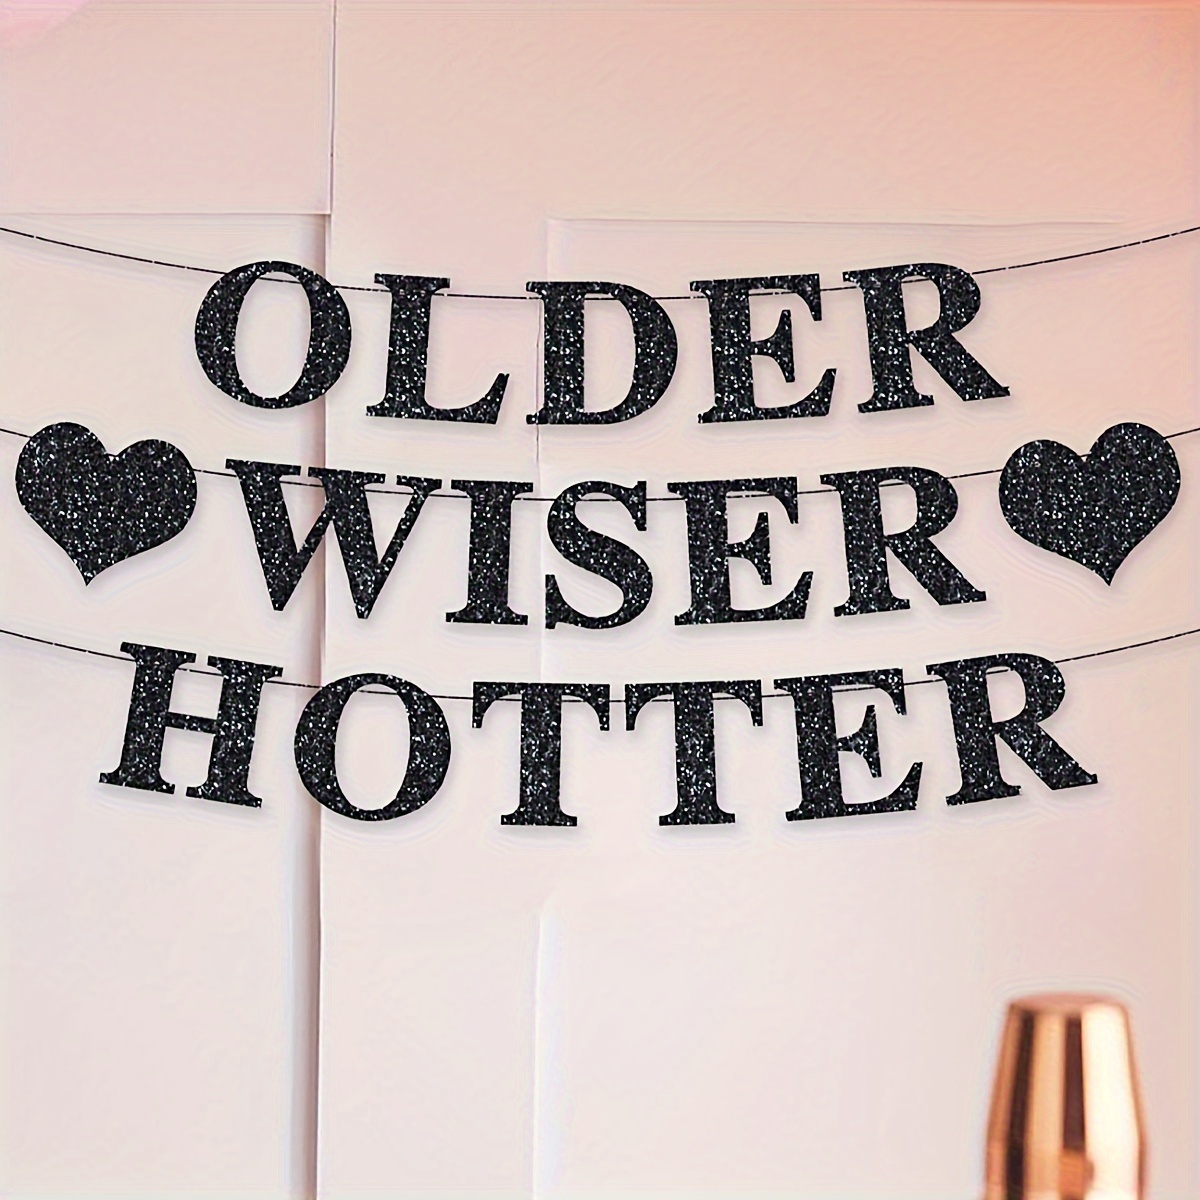 

1set Older Wiser Hotter Banner Funny Birthday Party Decorations For Women Black Glitter Happy Birthday Banner 21st 30th 40th 50th 60th 70th 80th Birthday Party Supplies, Home Wall Decor Supplies